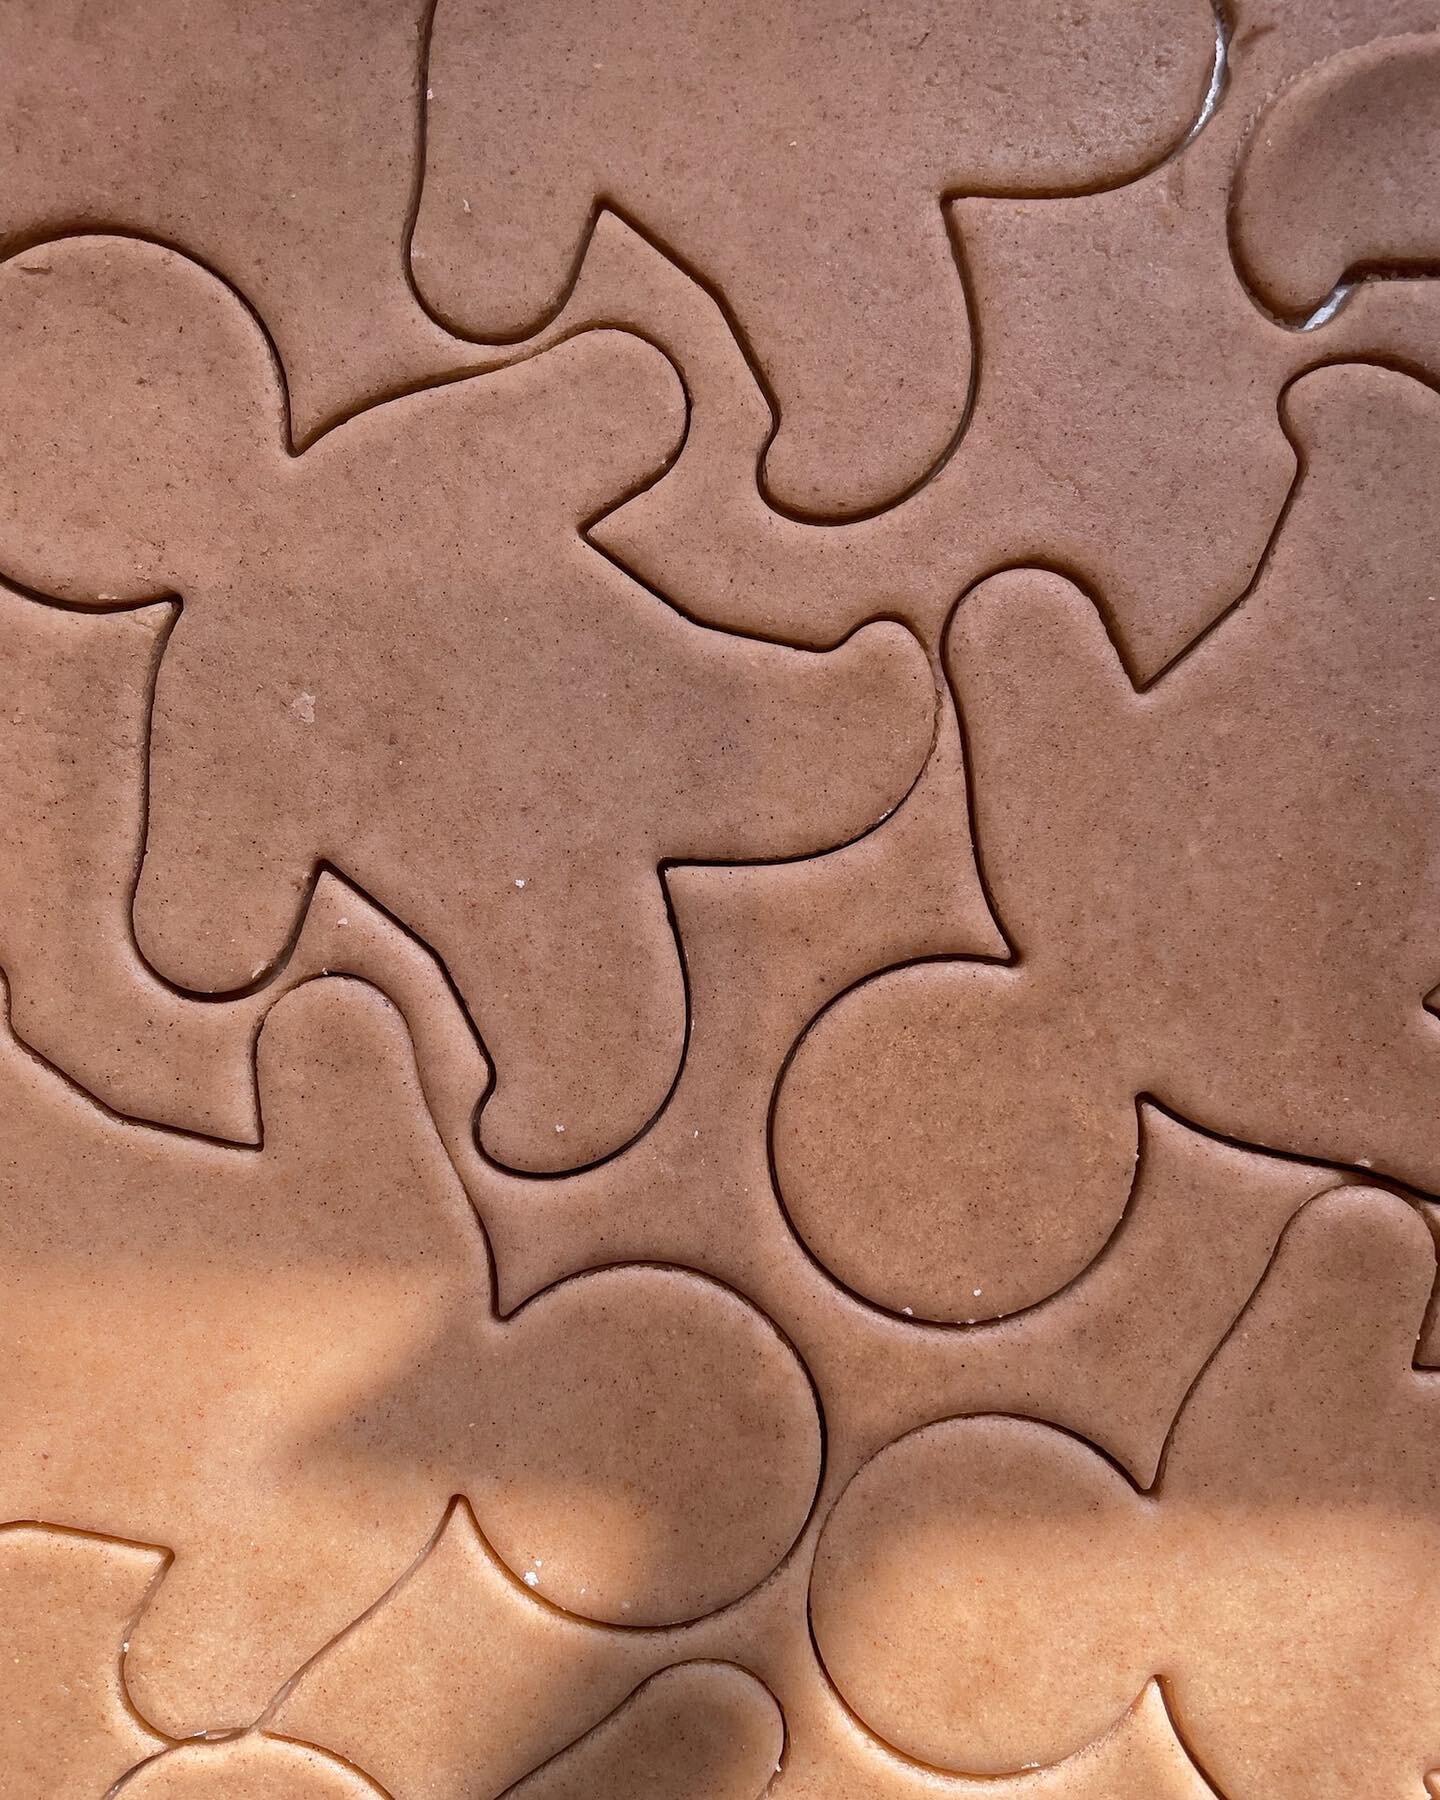 From dough to delight, these gingerbread man biscuits are on the brink of becoming sweet moments of cherish. 🍪✨ 

#gingerbread #gingerbreadman #gingerbreadbiscuits #gingerbreadcookies #gingerbreadmancookies #bakery #burtononthewater #bakeryonthewate